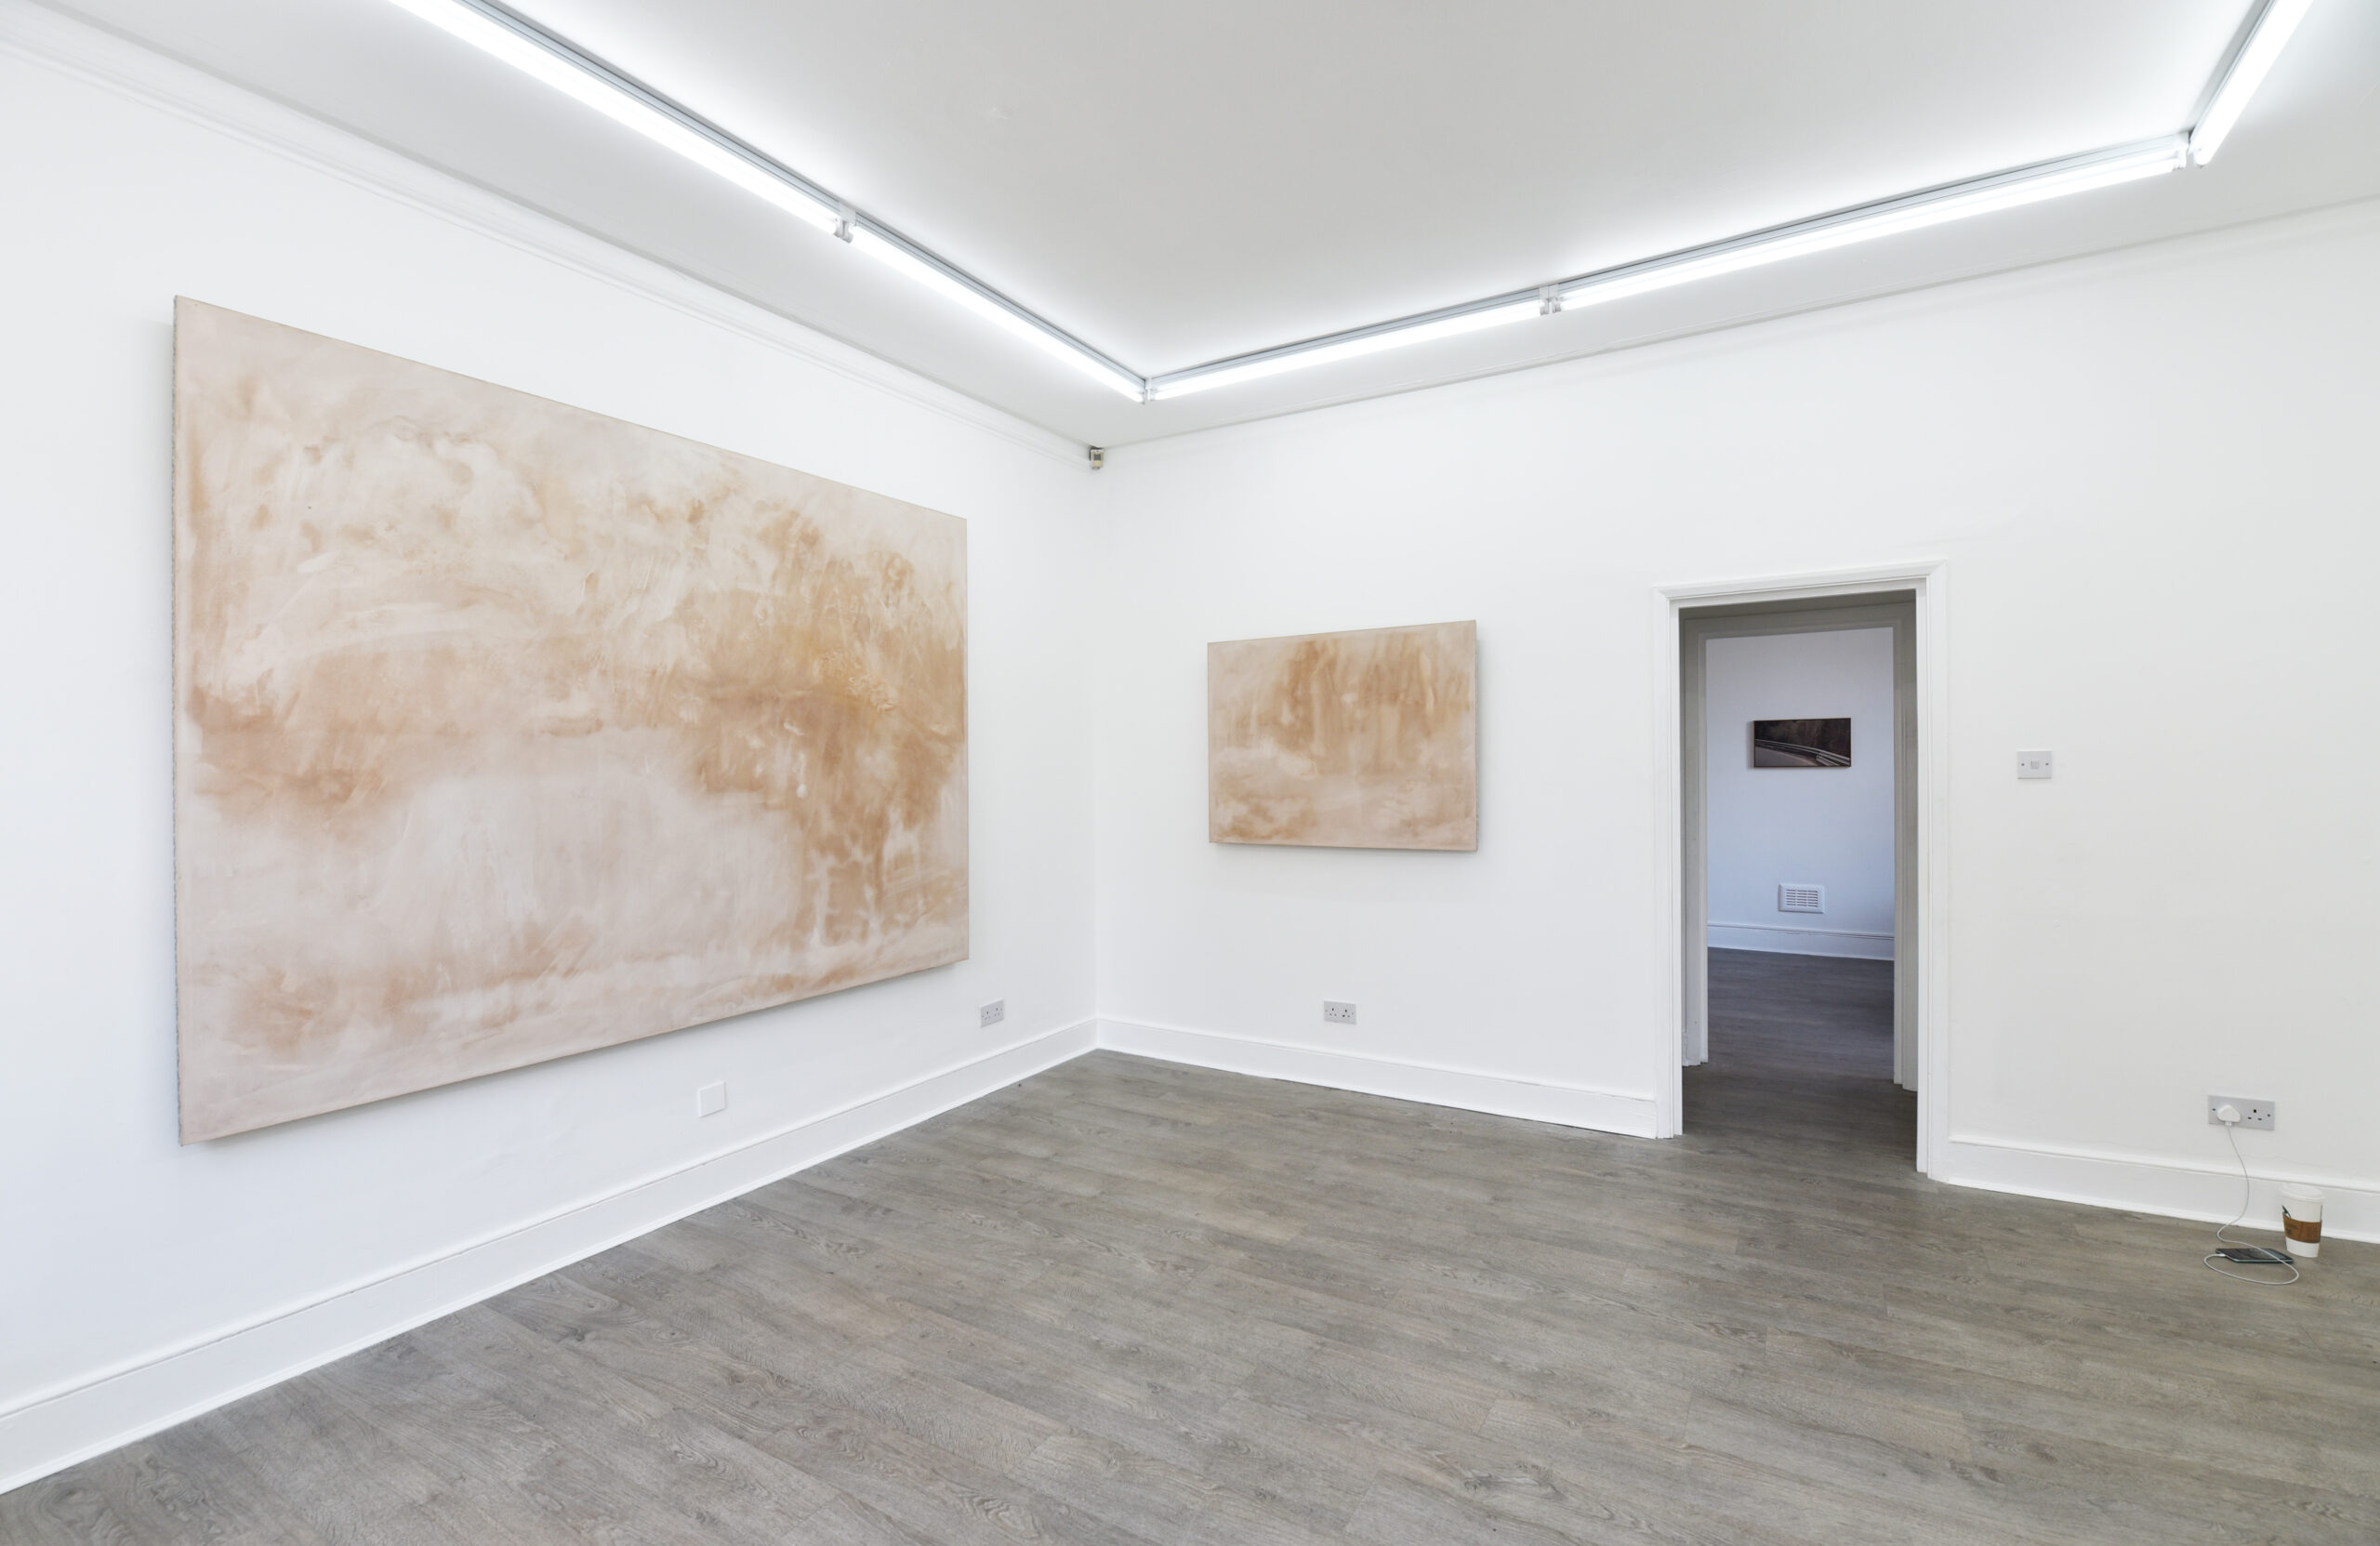 Exhibition view: Benjamin Fitton Aspirational Bucolics at LUNGLEY Gallery, London.  Image copyright of the artist.